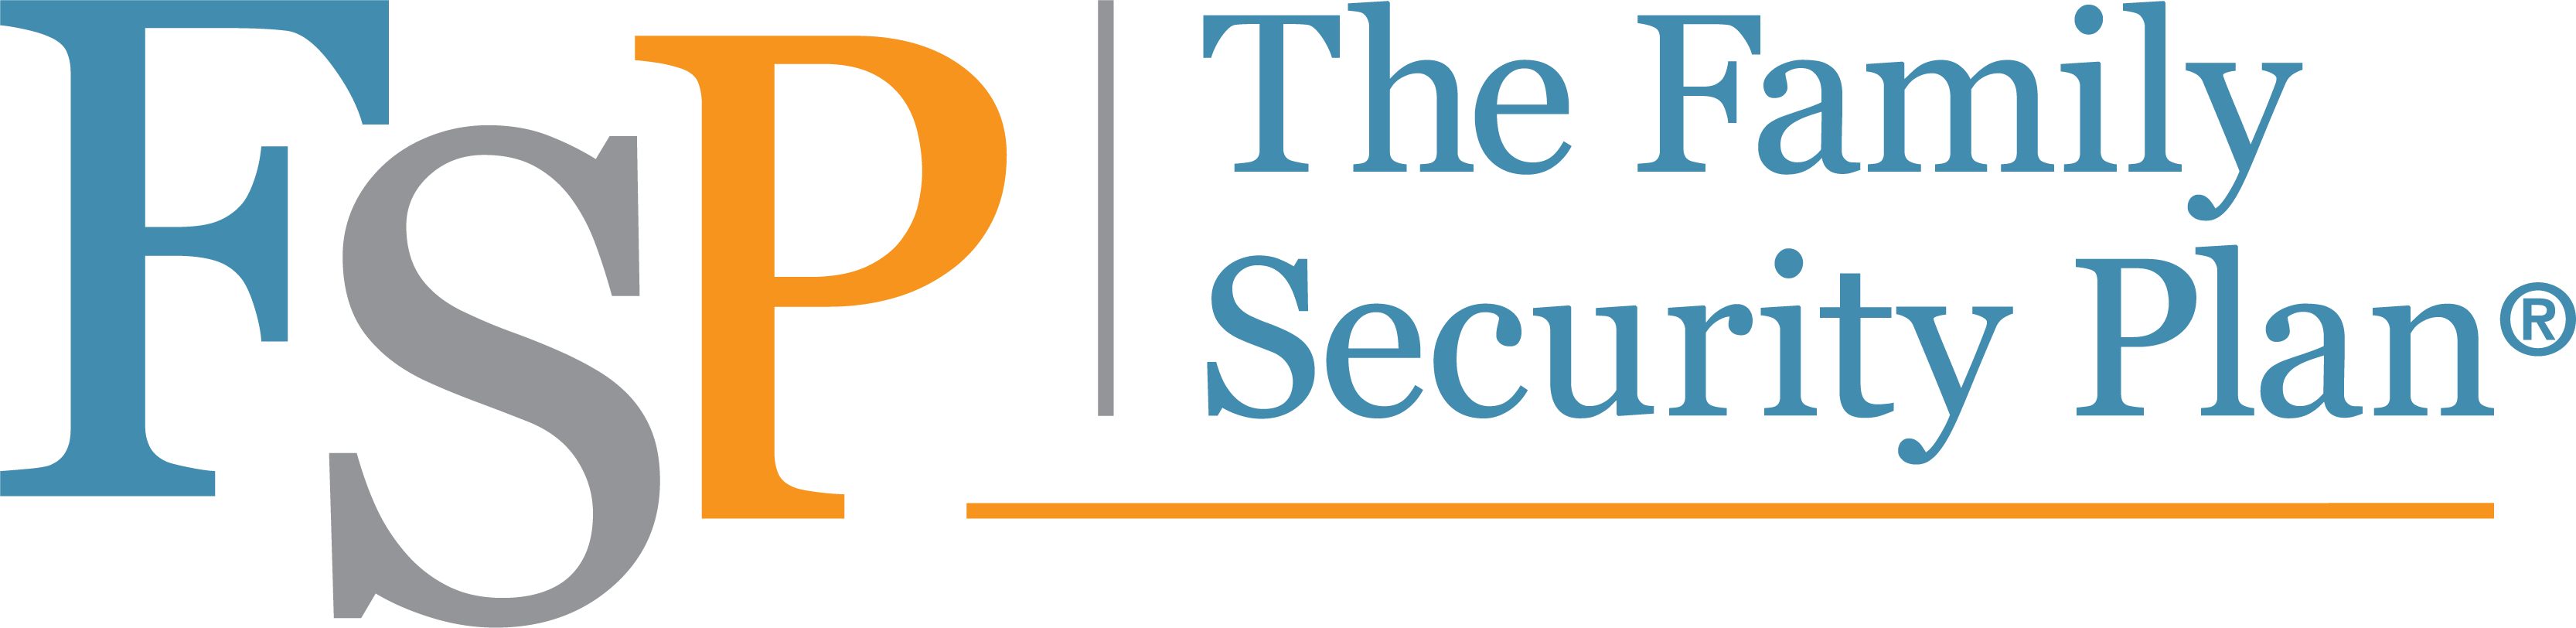 PFP The Family Security Plan